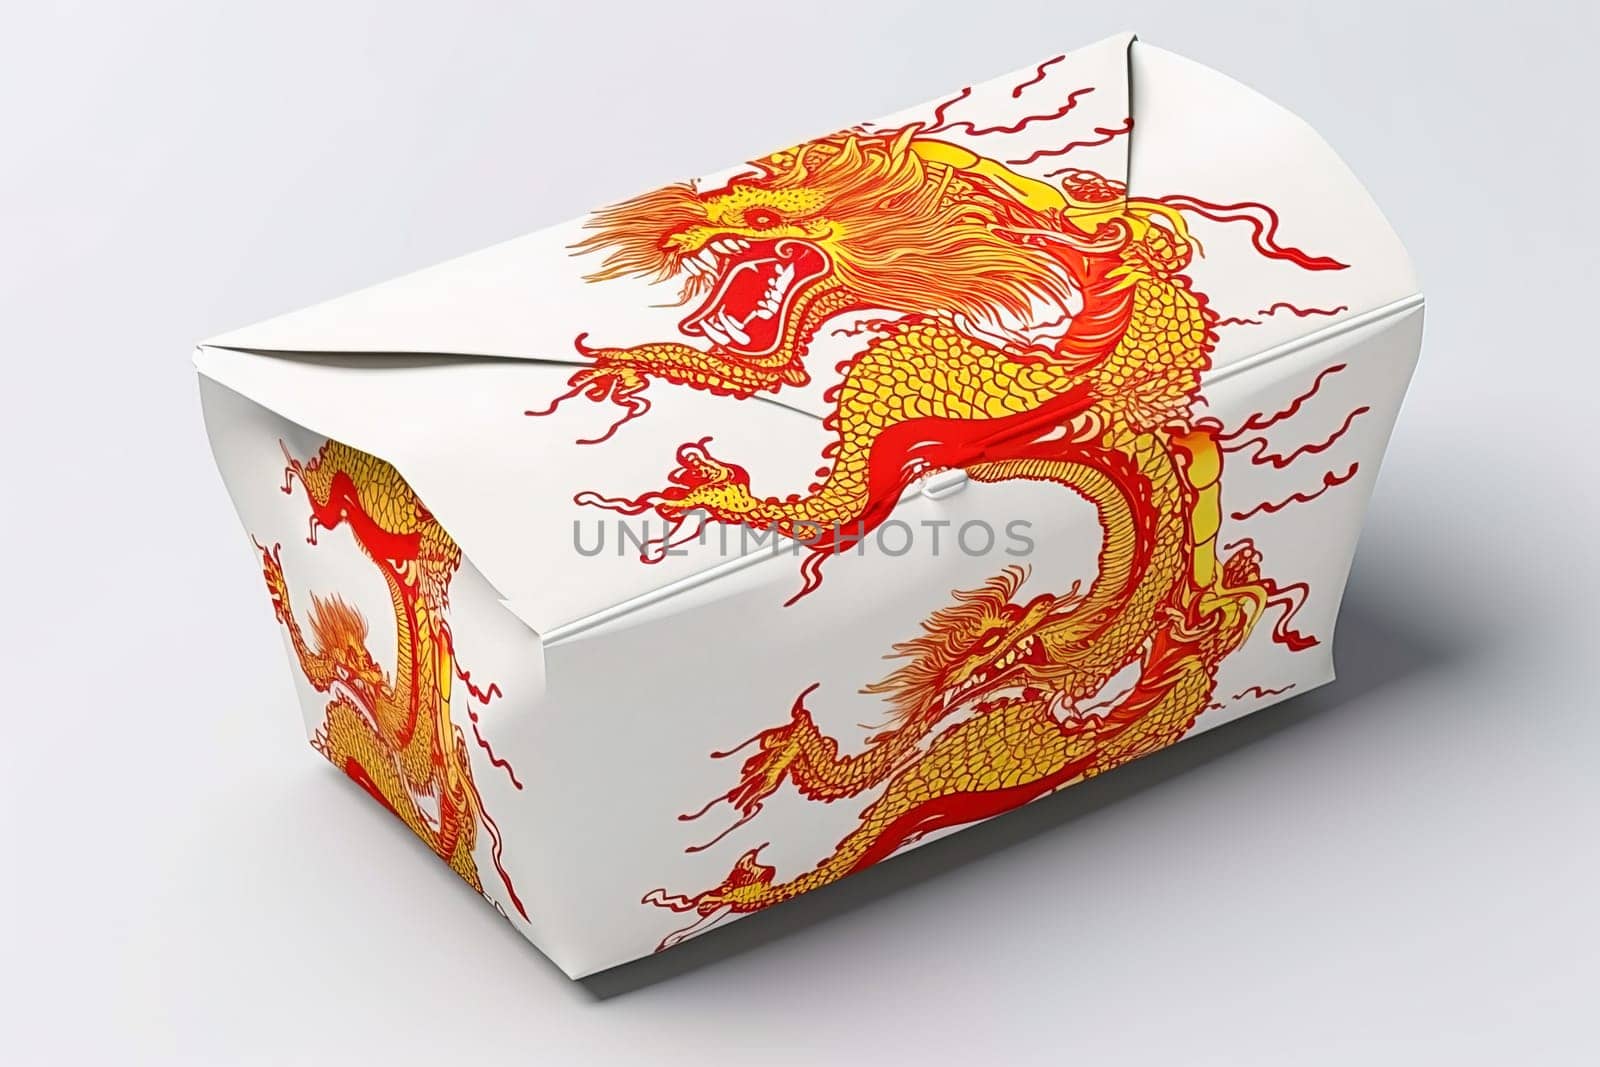 Food packaging box with dragon pattern. High quality photo